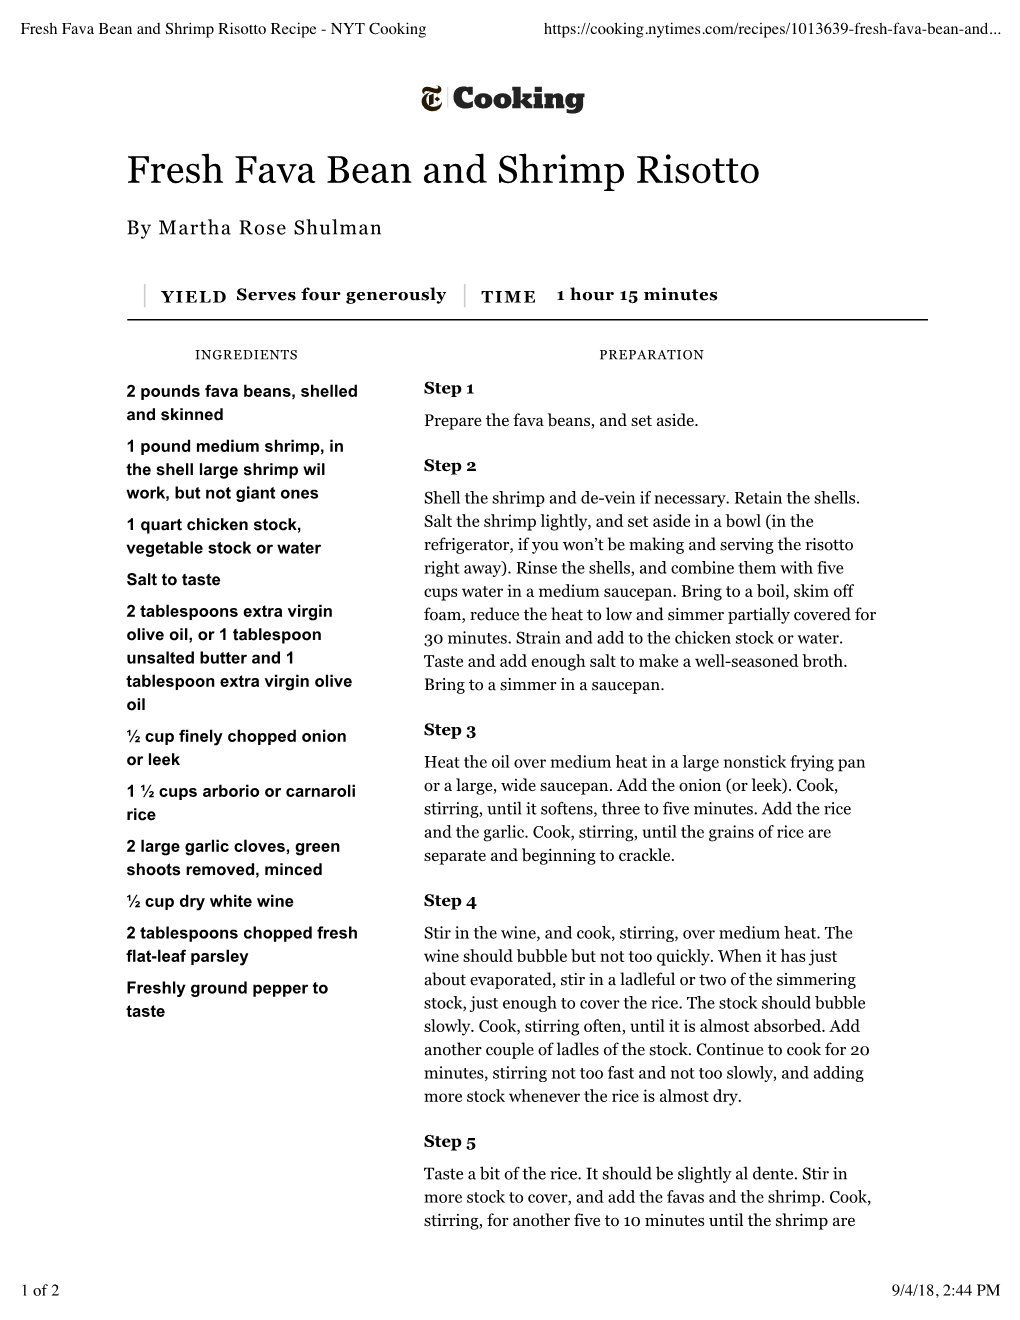 Fresh Fava Bean and Shrimp Risotto Recipe - NYT Cooking